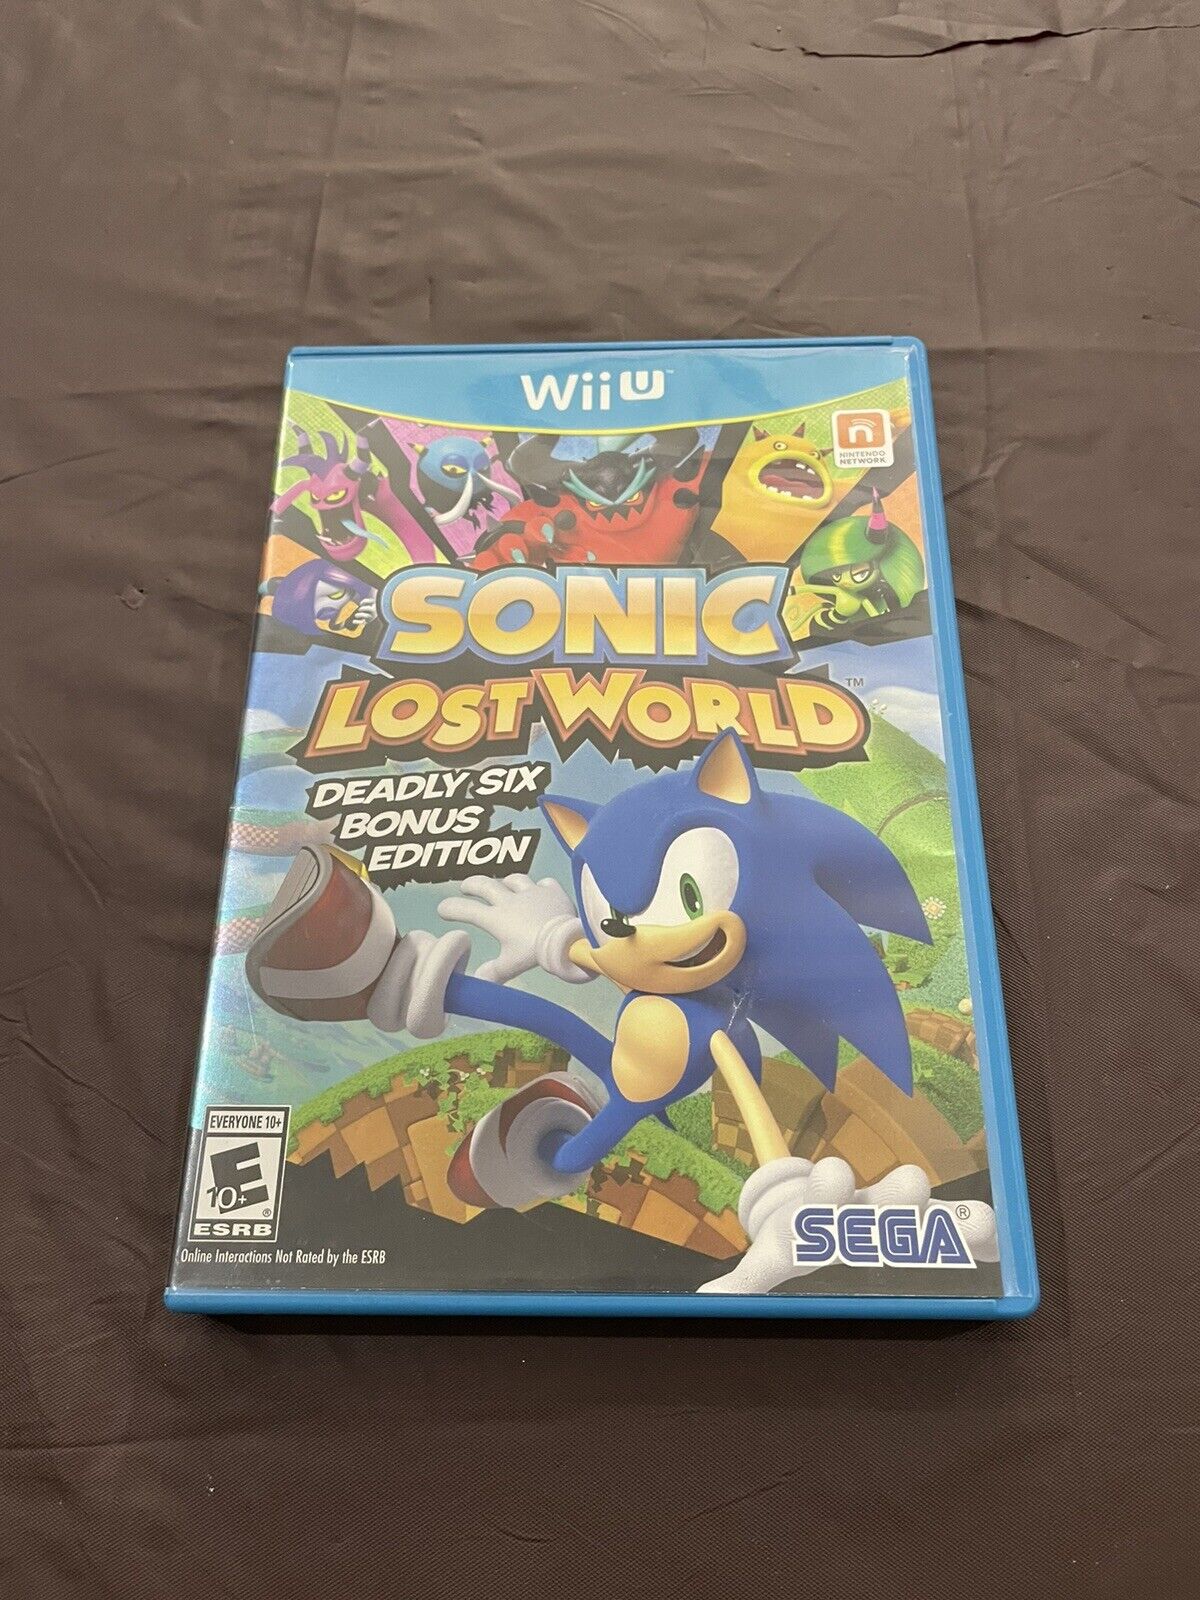 Sonic Lost World Deadly Six Bonus Edition Wii U 2013 Complete with Manual